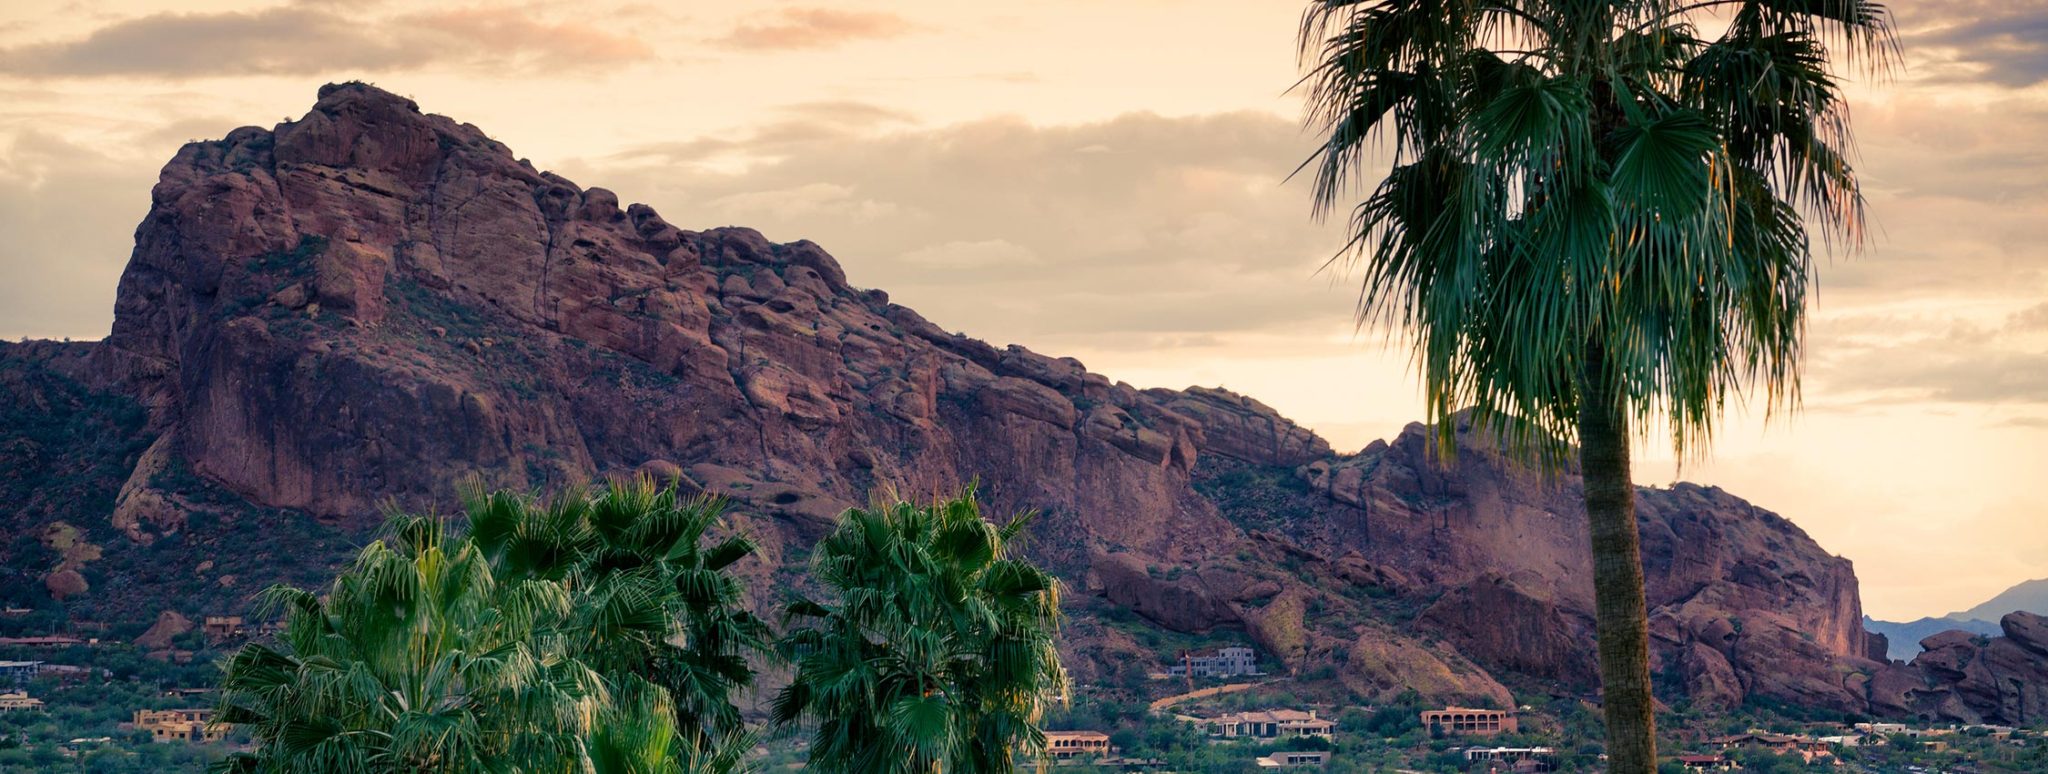 Cheap or Free Things To Do During an Extended Stay in Phoenix